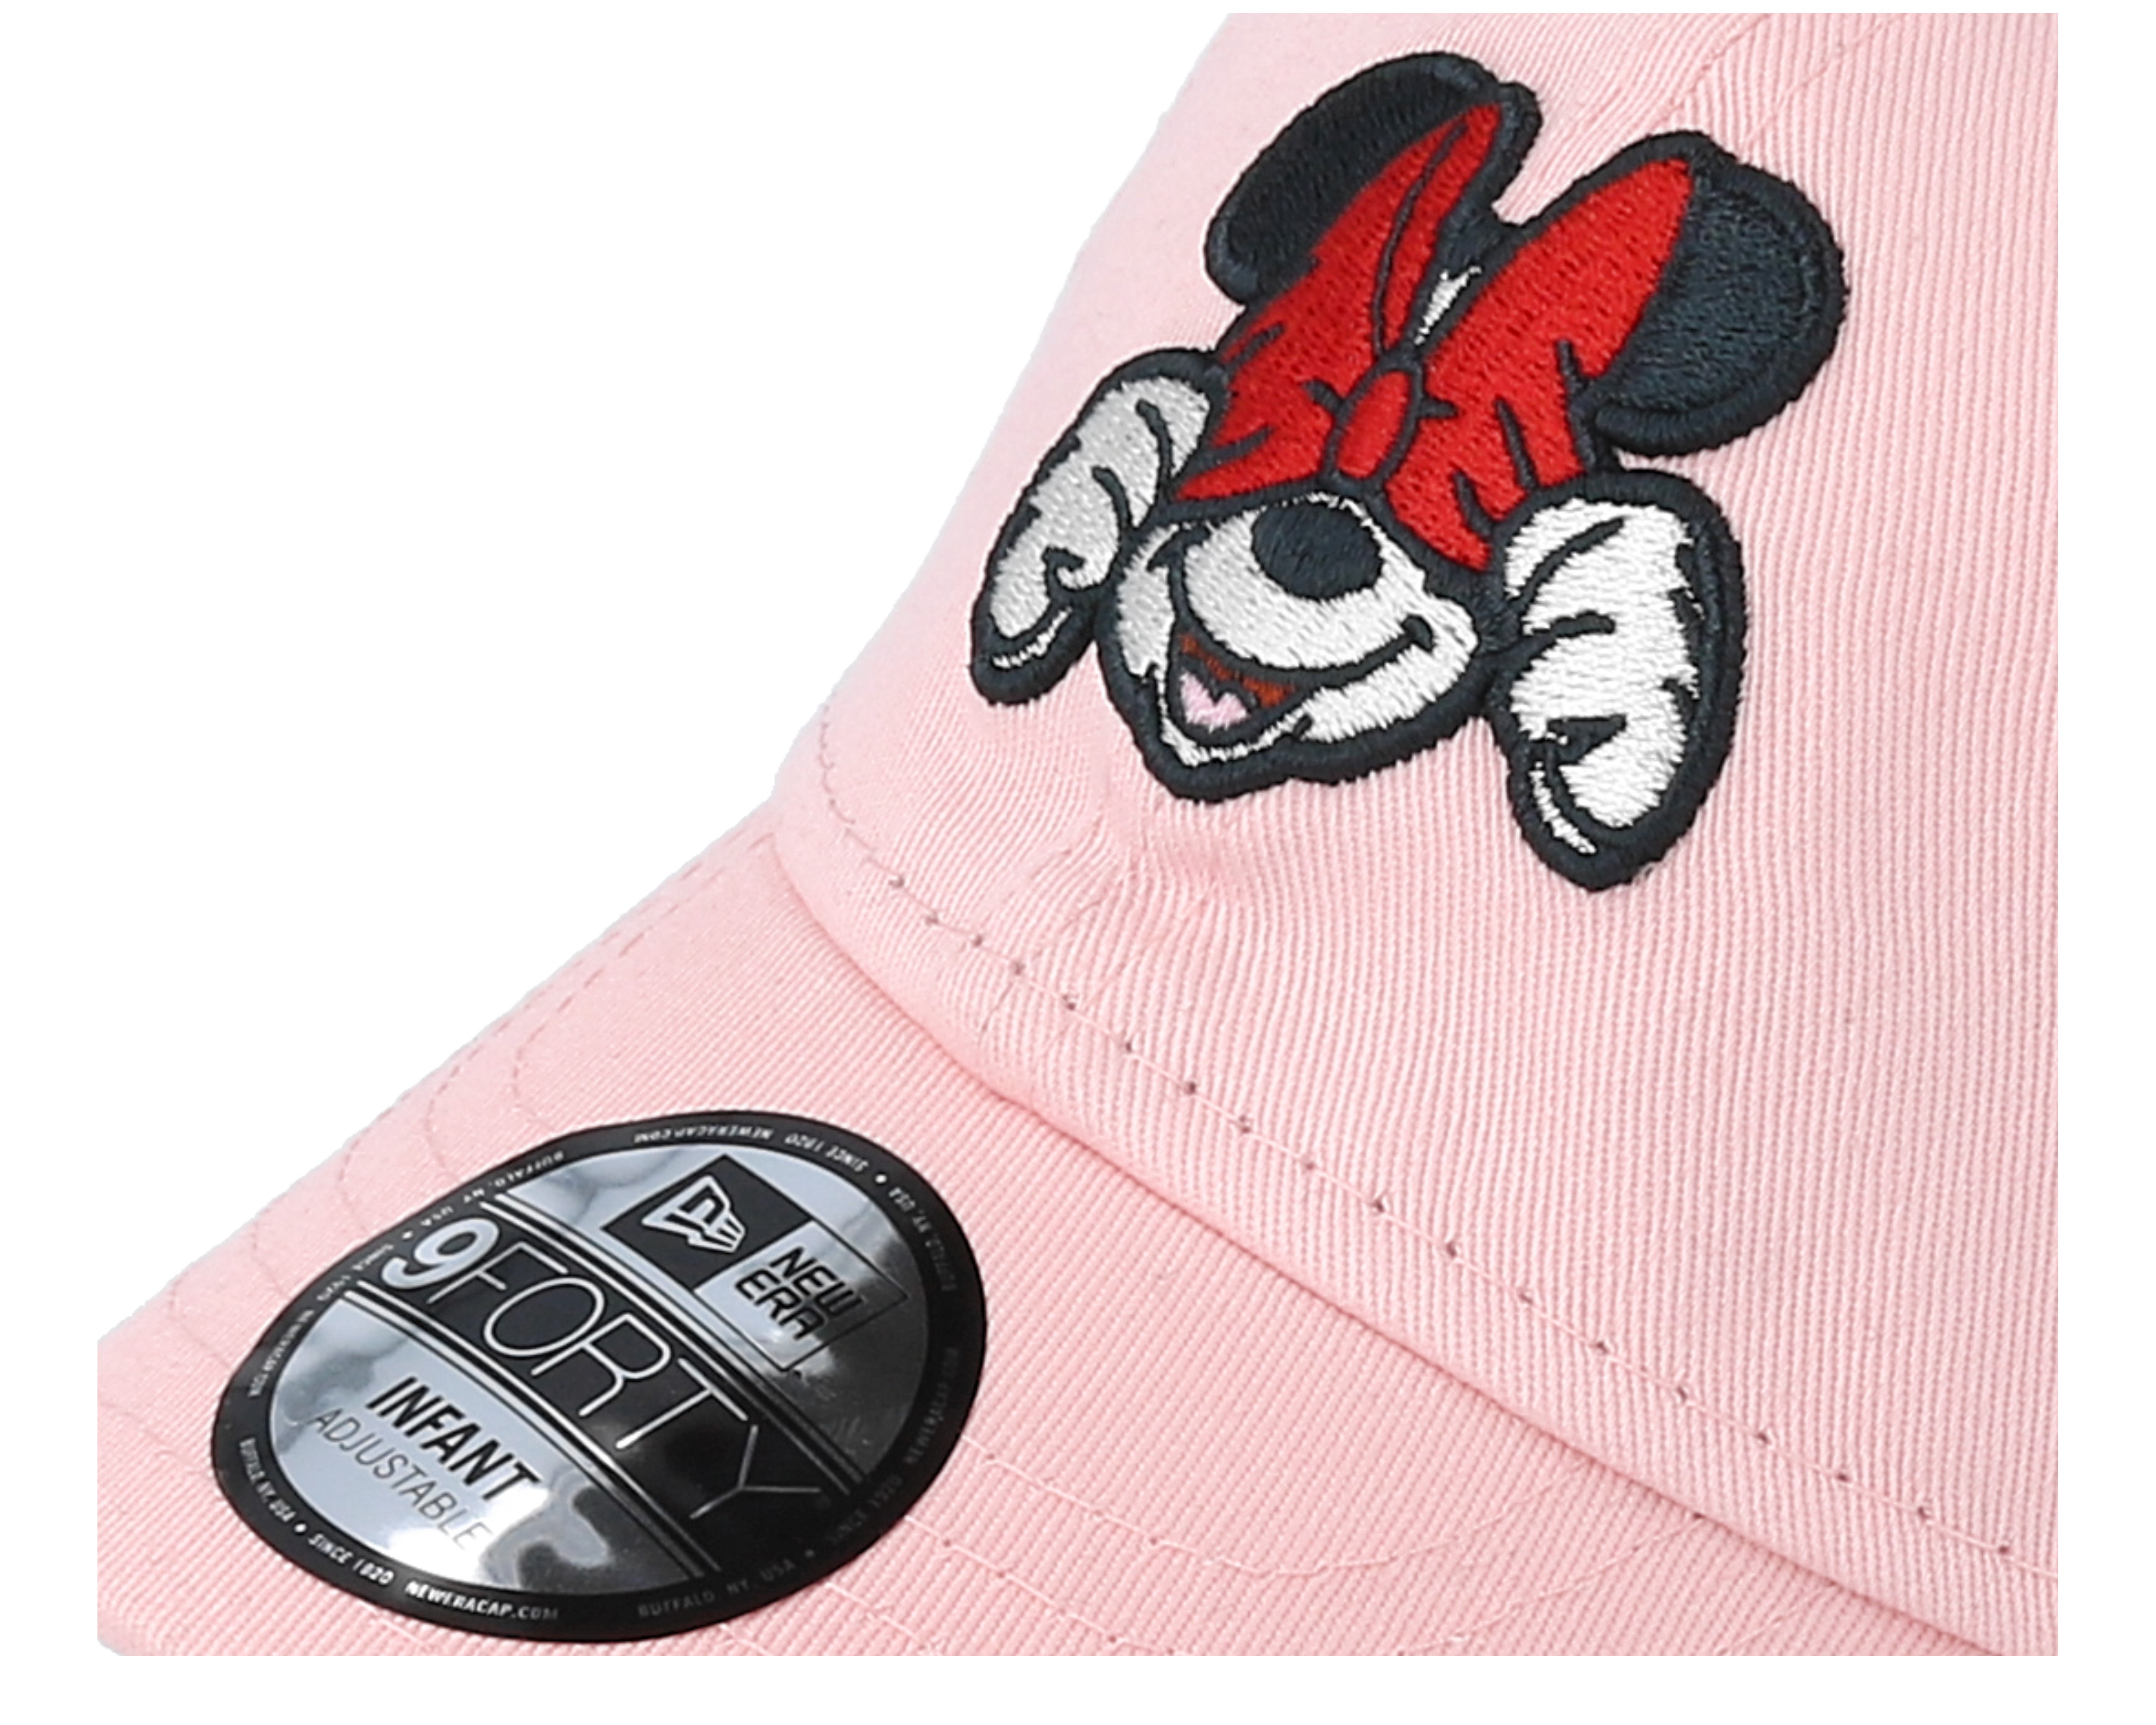 New Era Disney Xpress Minnie Mouse 9Forty Elasticback cap Pink Infant Seaugling